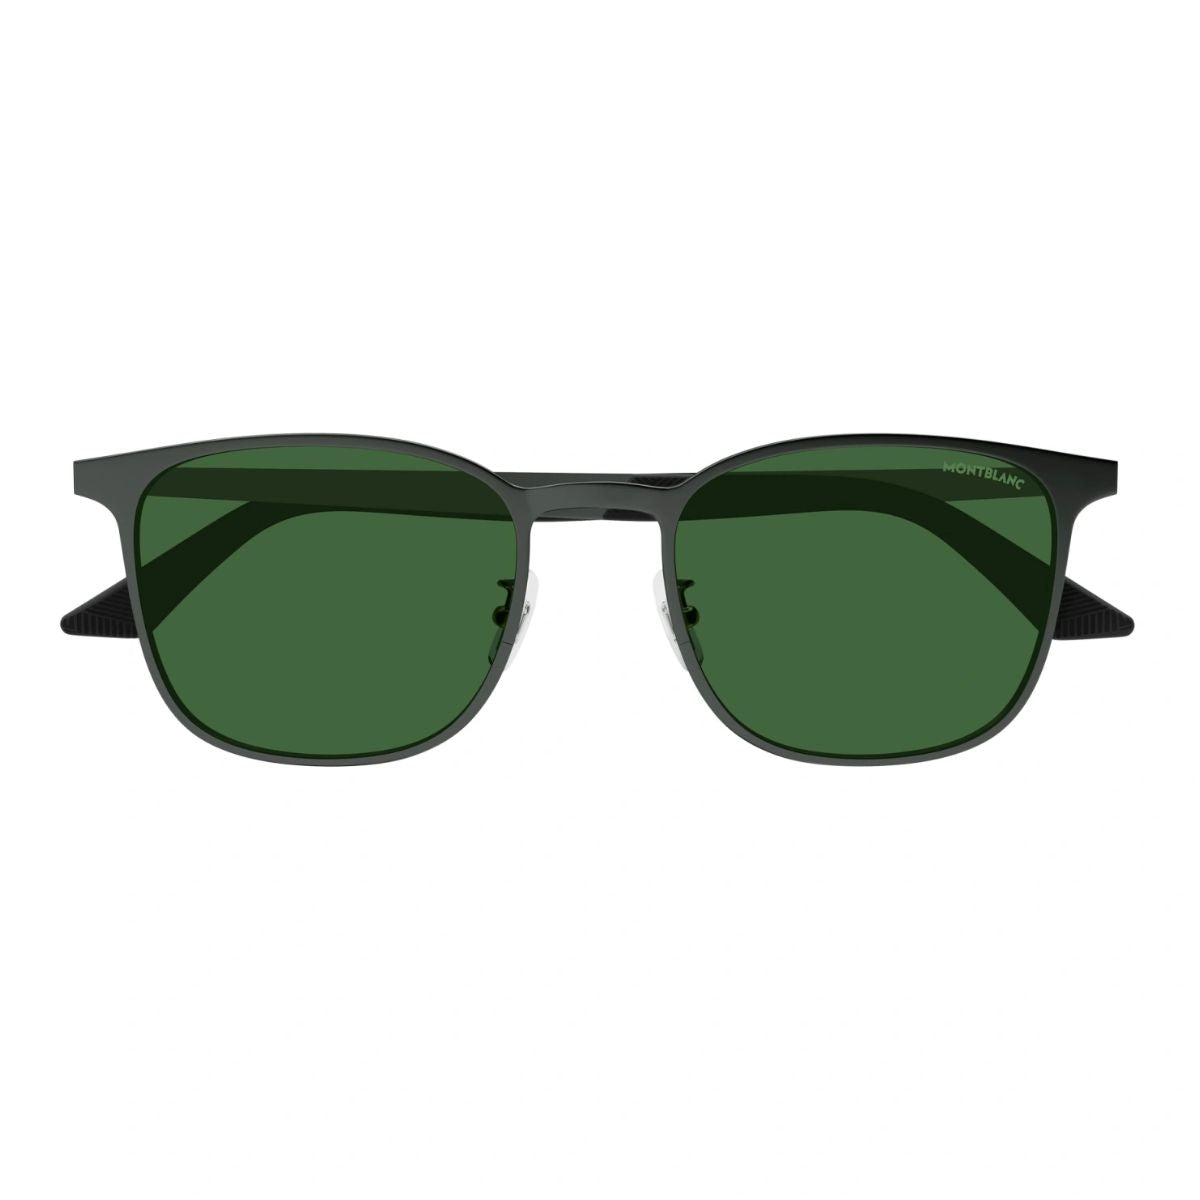 "Shop Latest Mont Blanc Metal Oval Sunglasses For Mens At Optorium"